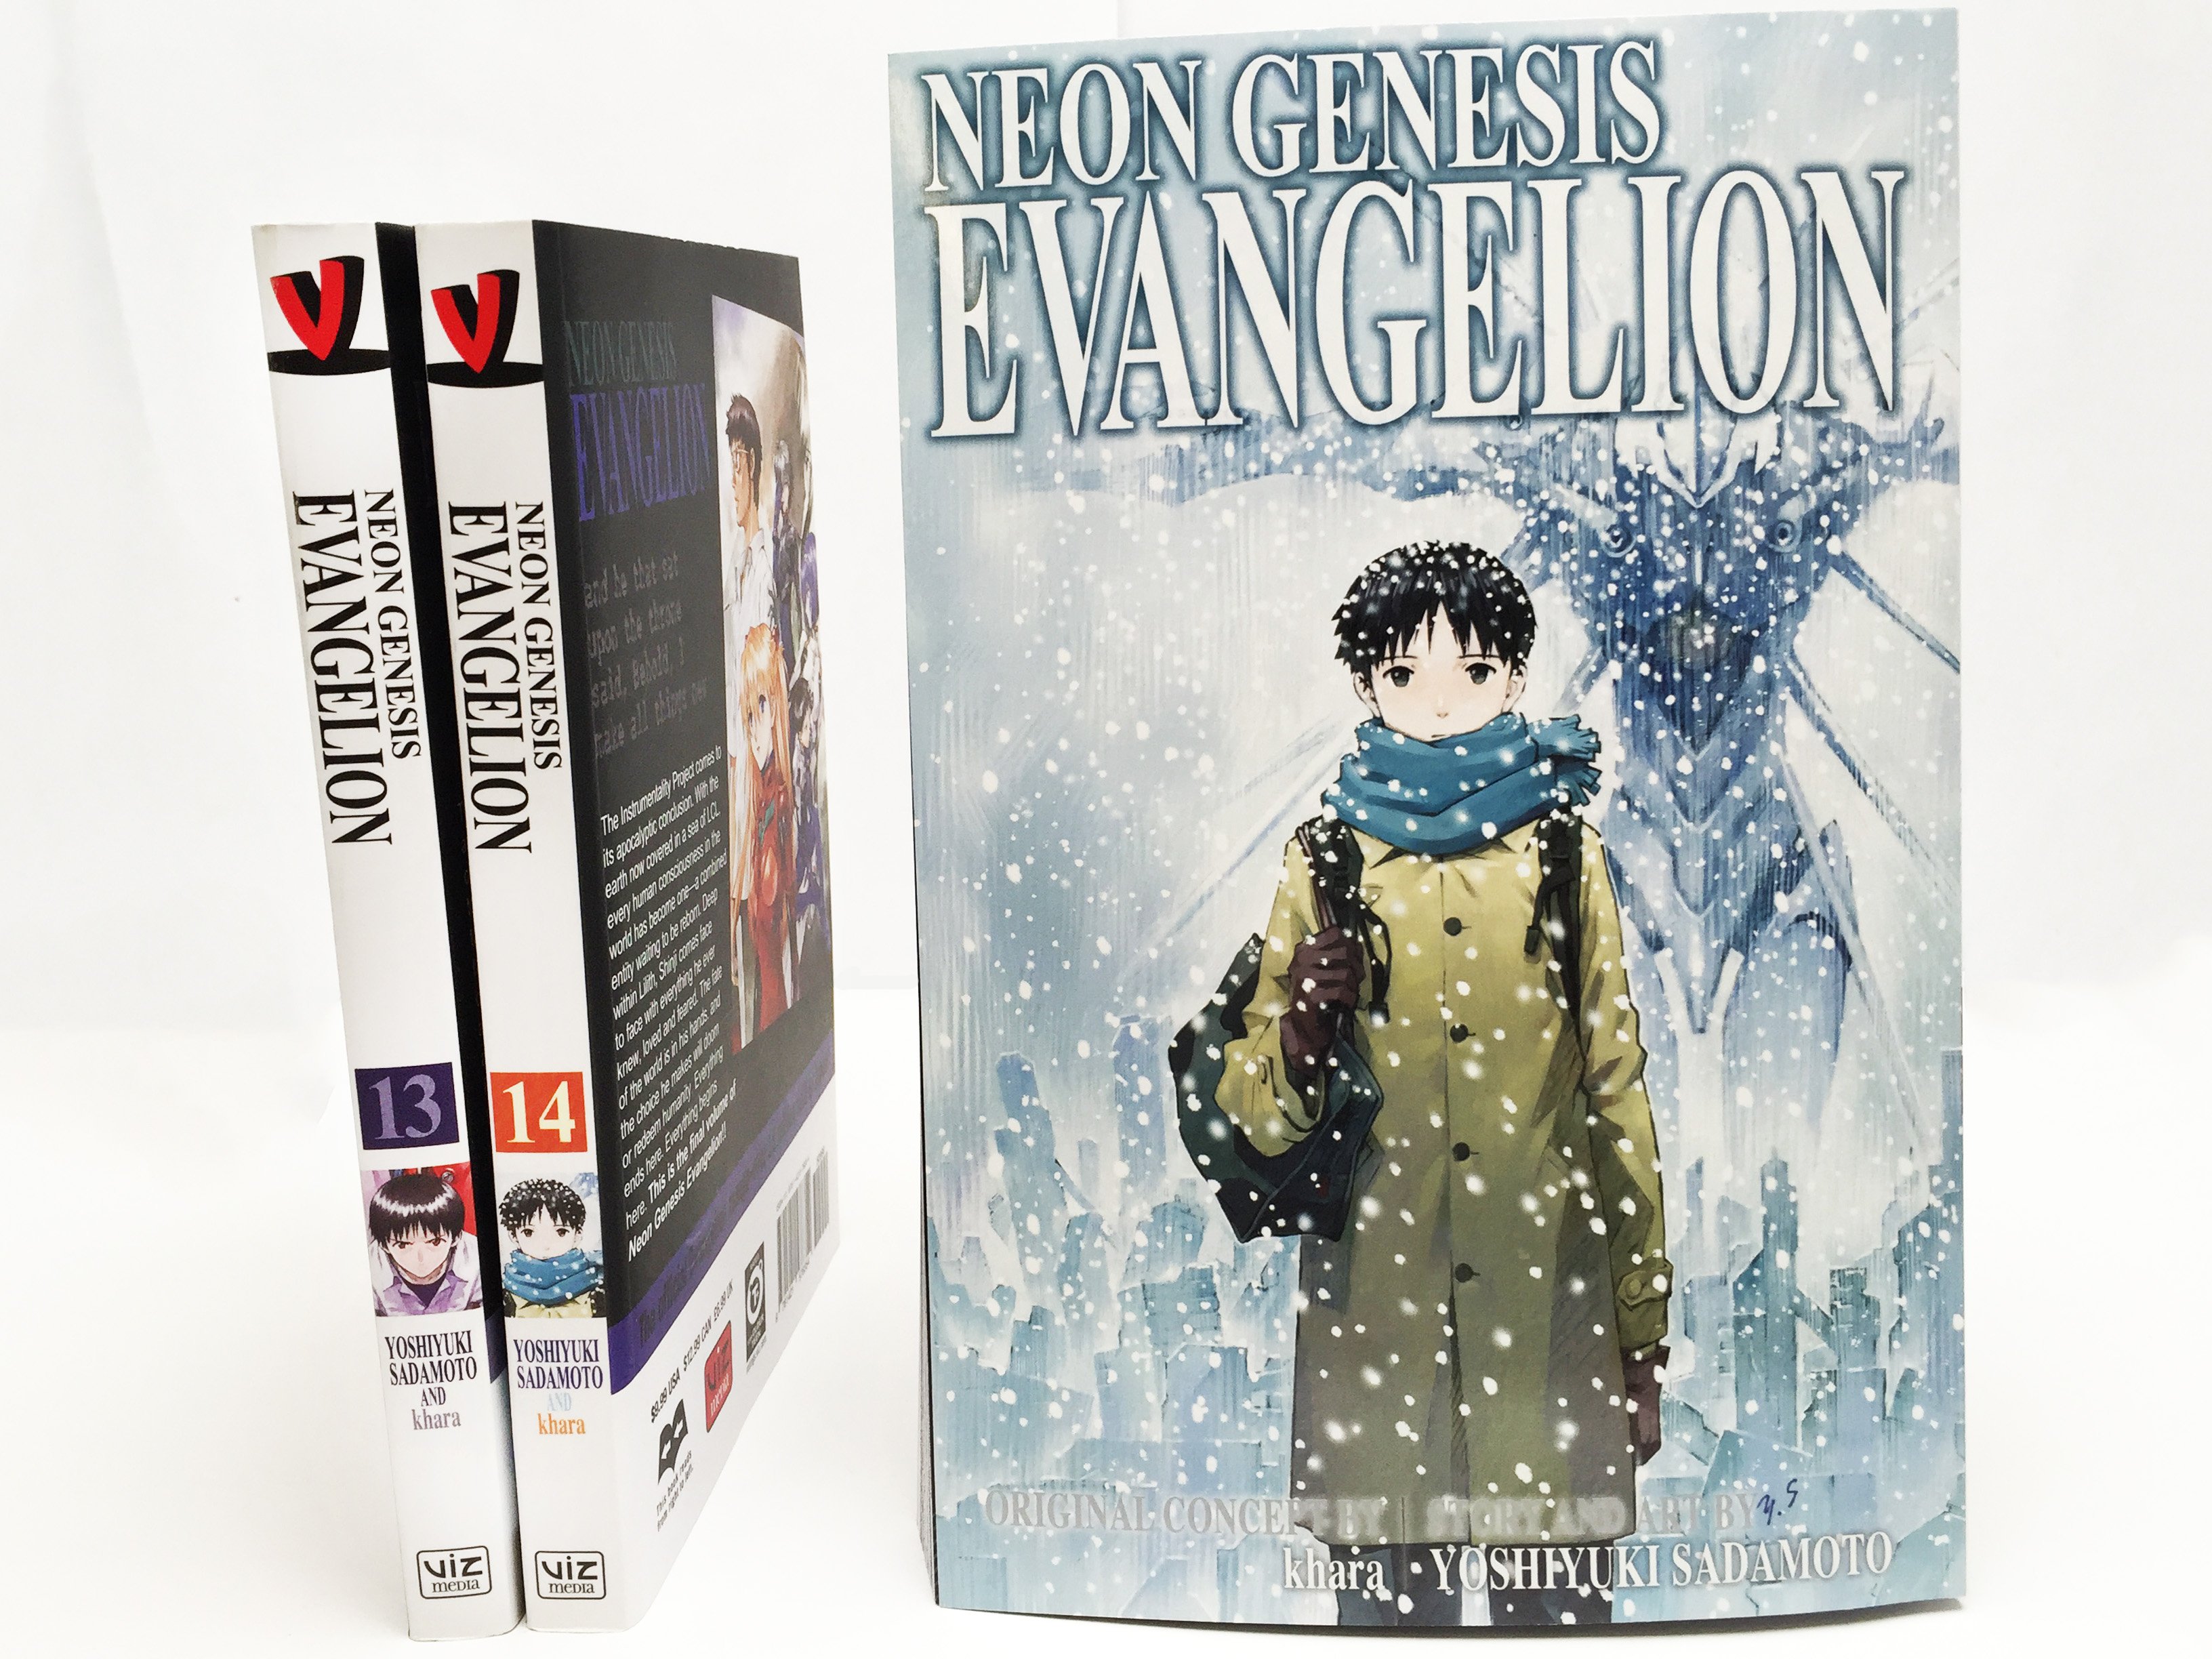 Viz It Is Time To Finish That Neon Genesis Collection New 2 In 1 Edition Vol 5 T Co Z4pujyqbce T Co 2qfyghcdzj Twitter